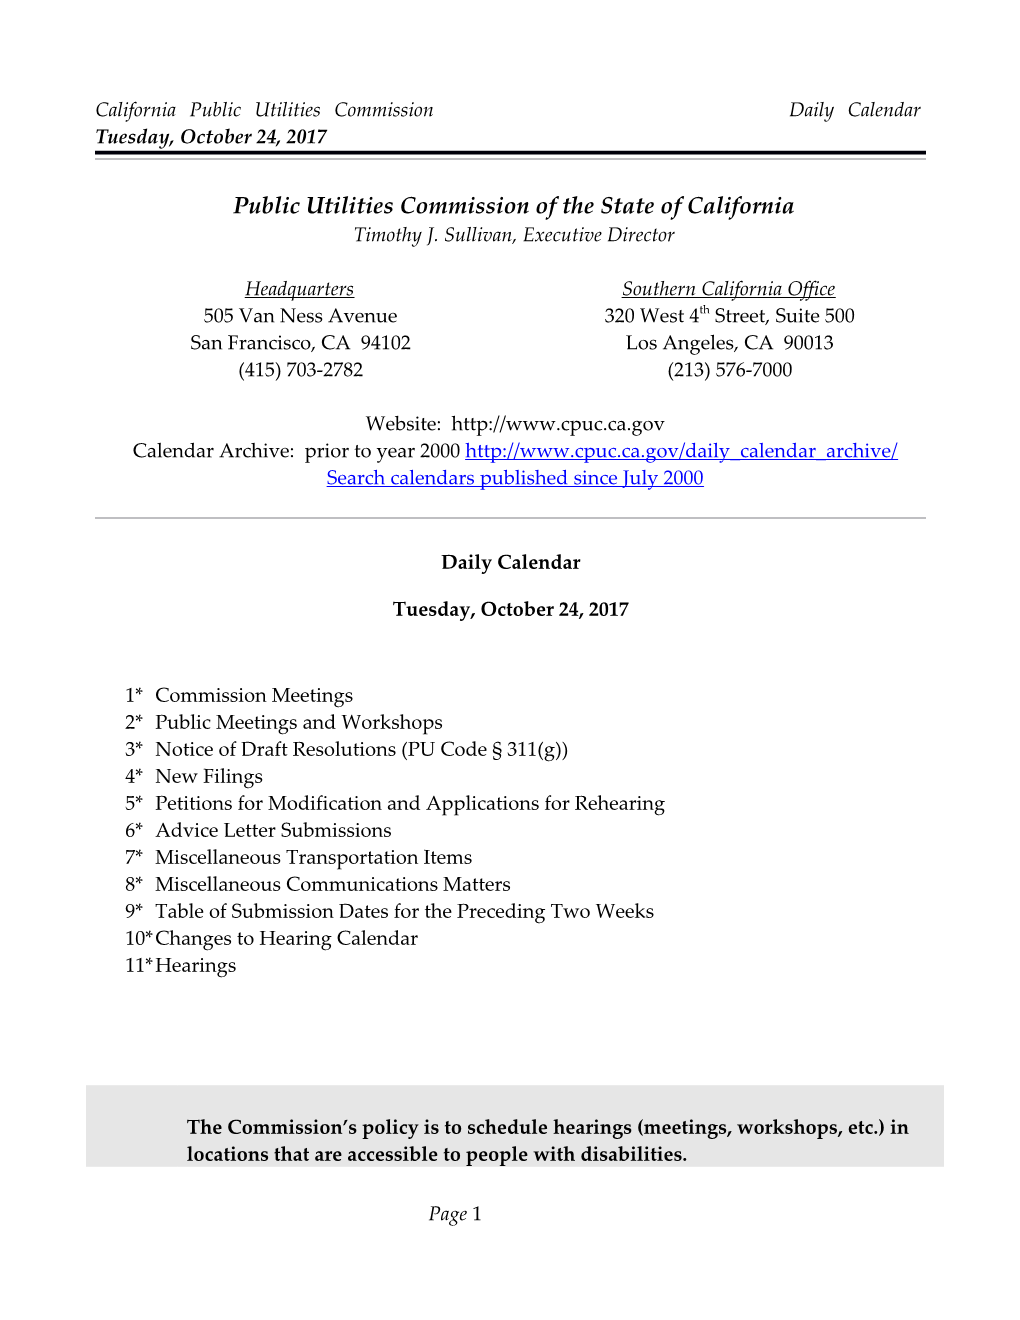 California Public Utilities Commission Daily Calendar Tuesday, October 24, 2017